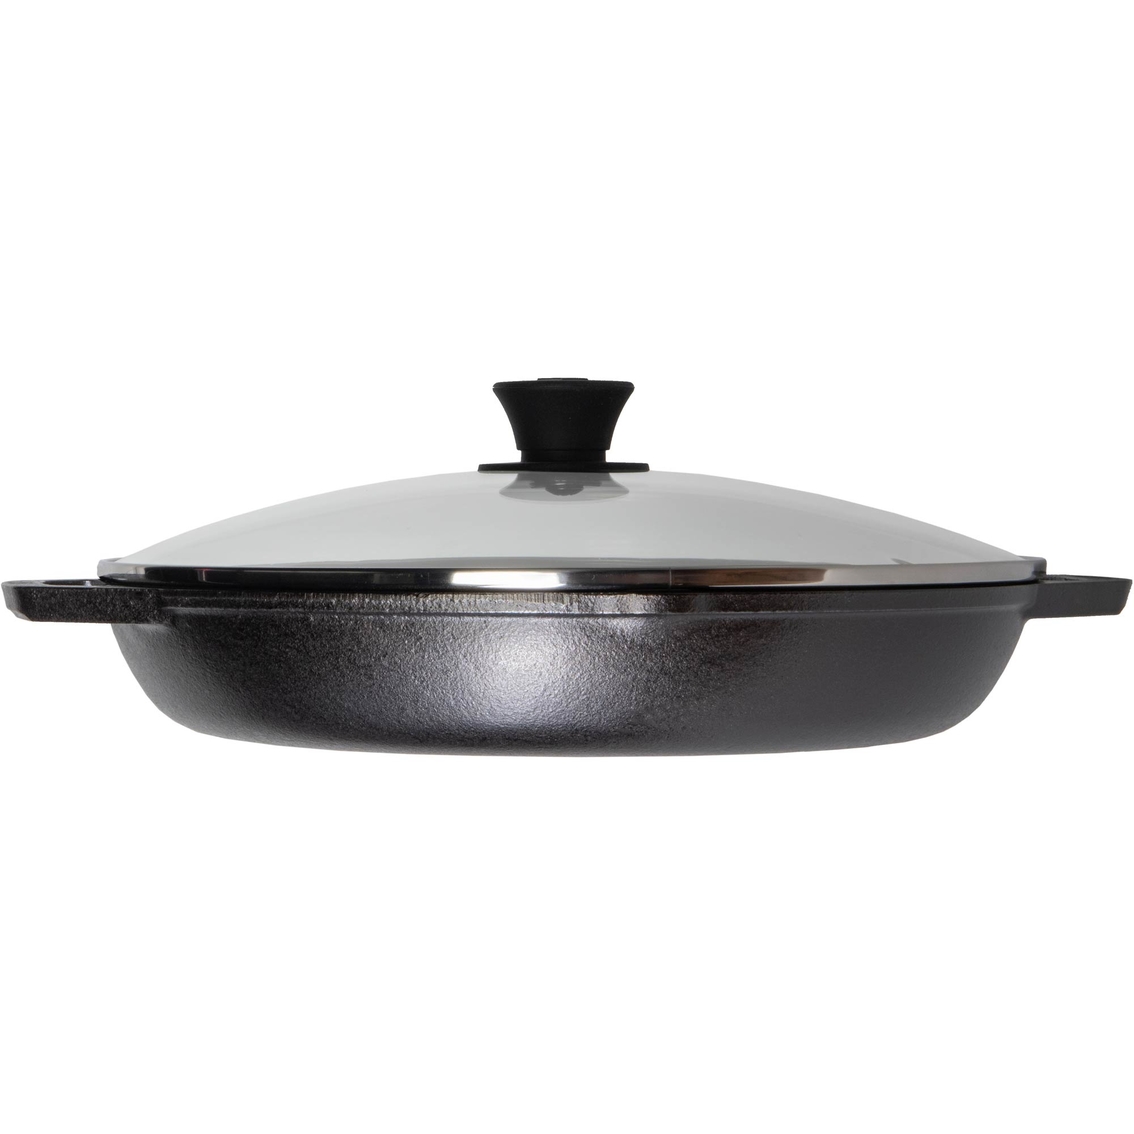 Lodge Chef Collection 12 In. Everyday Pan